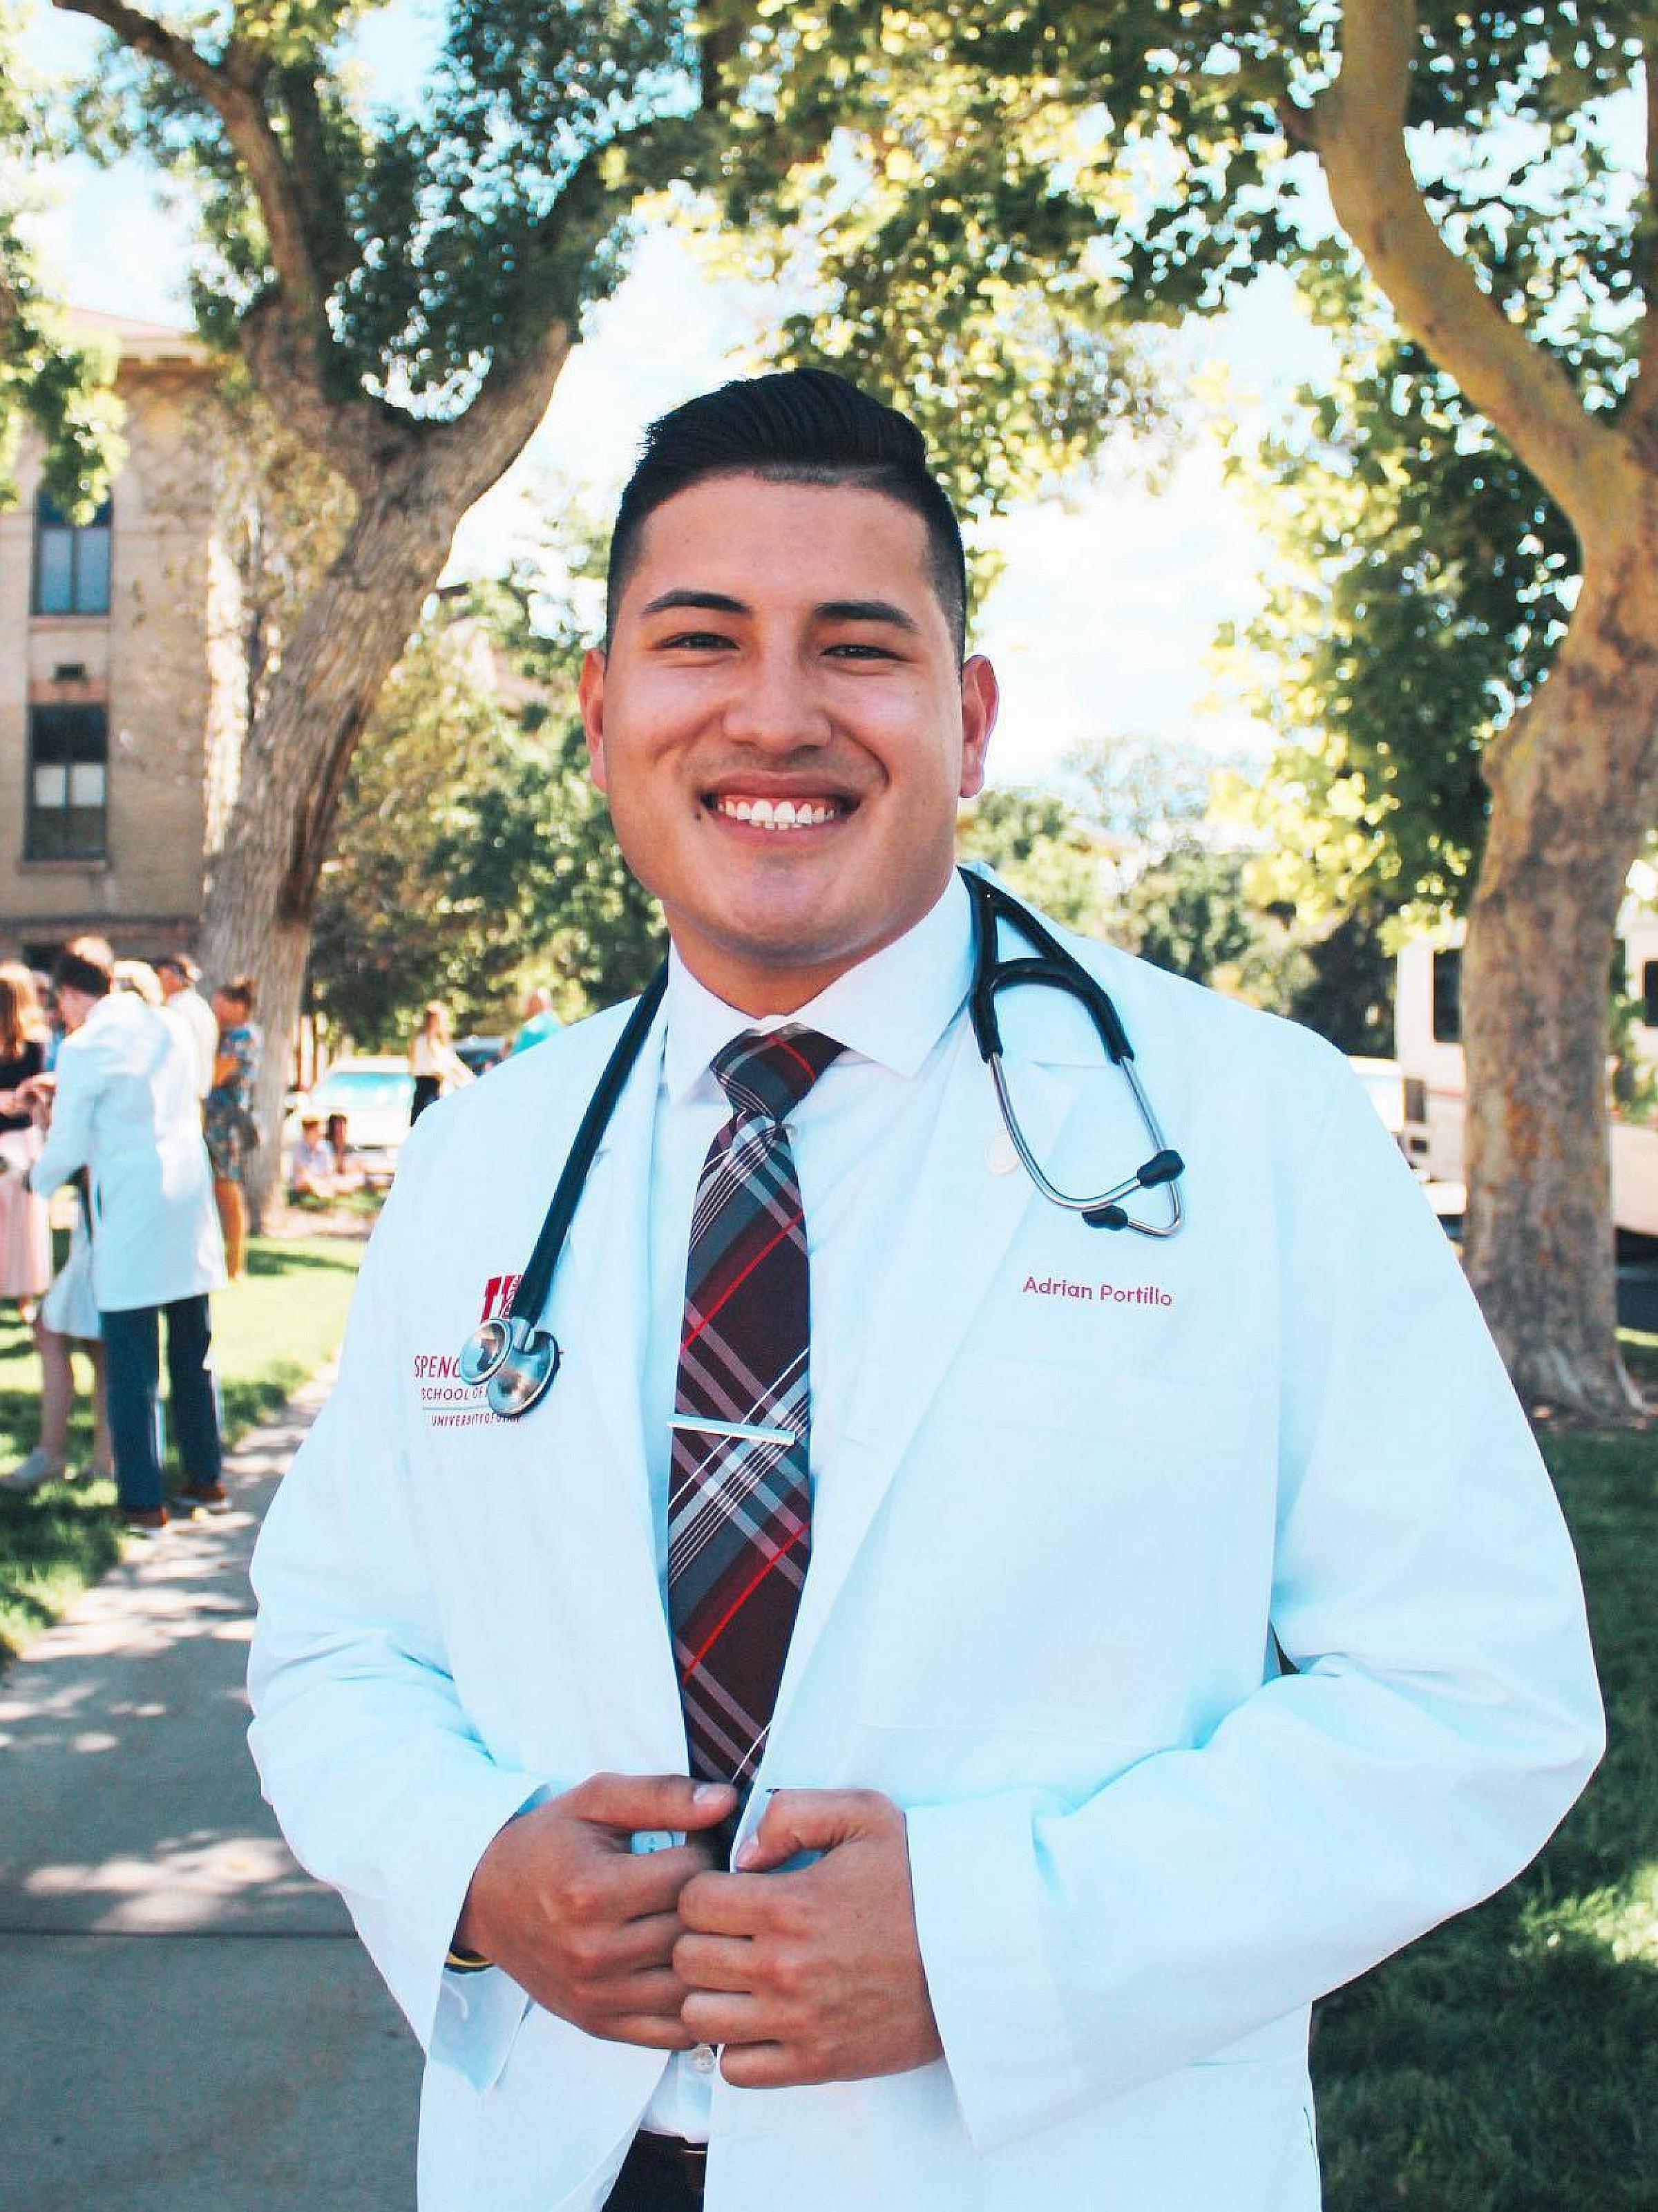 Adrian Portillo wearing lab coat and stethoscope at outdoor event